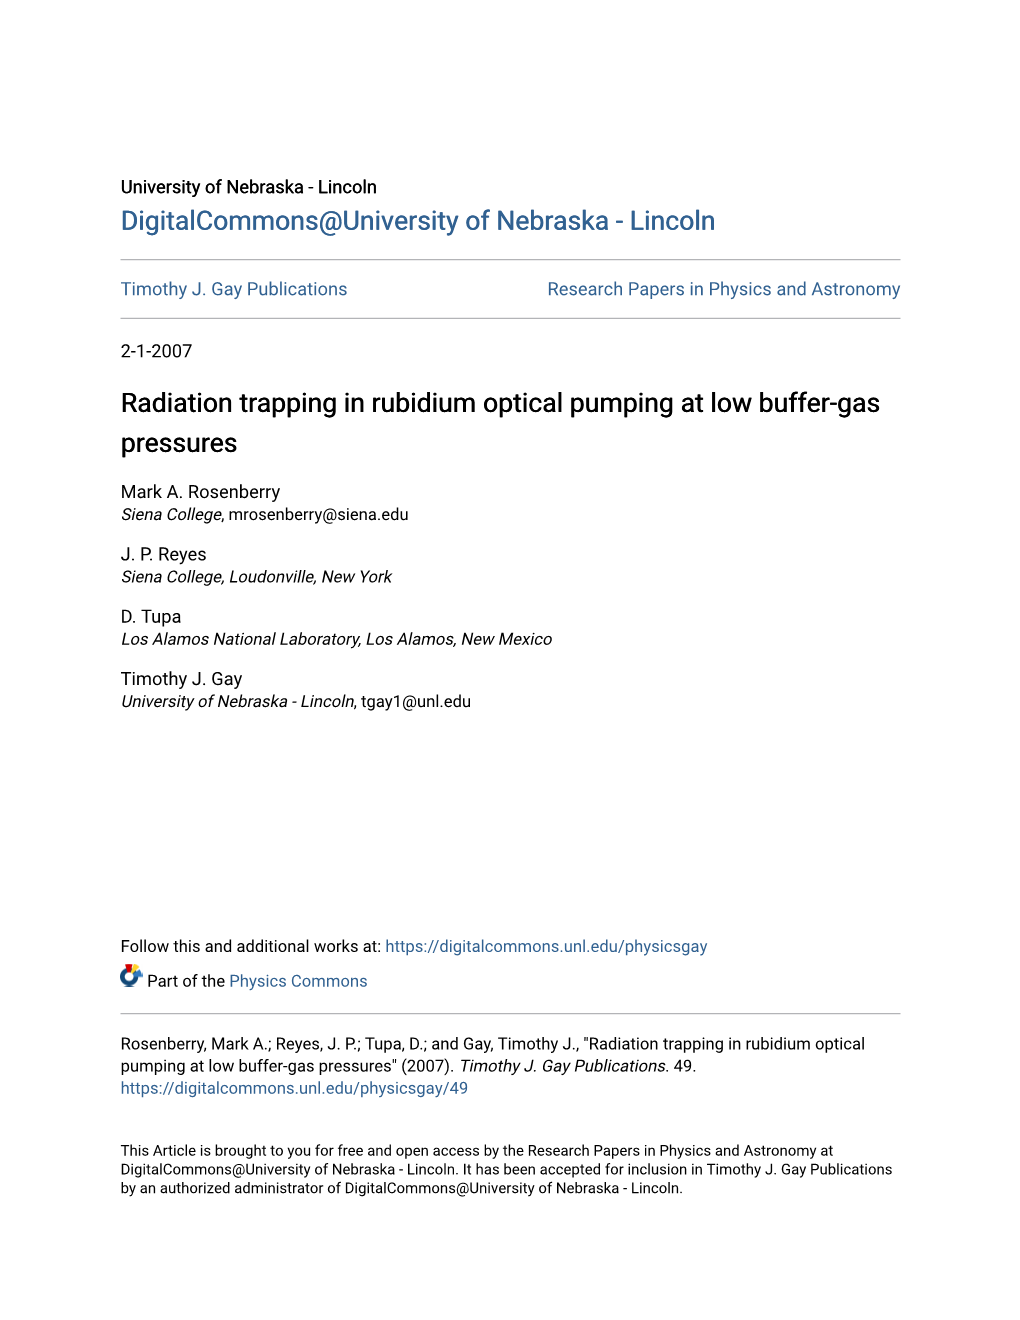 Radiation Trapping in Rubidium Optical Pumping at Low Buffer-Gas Pressures